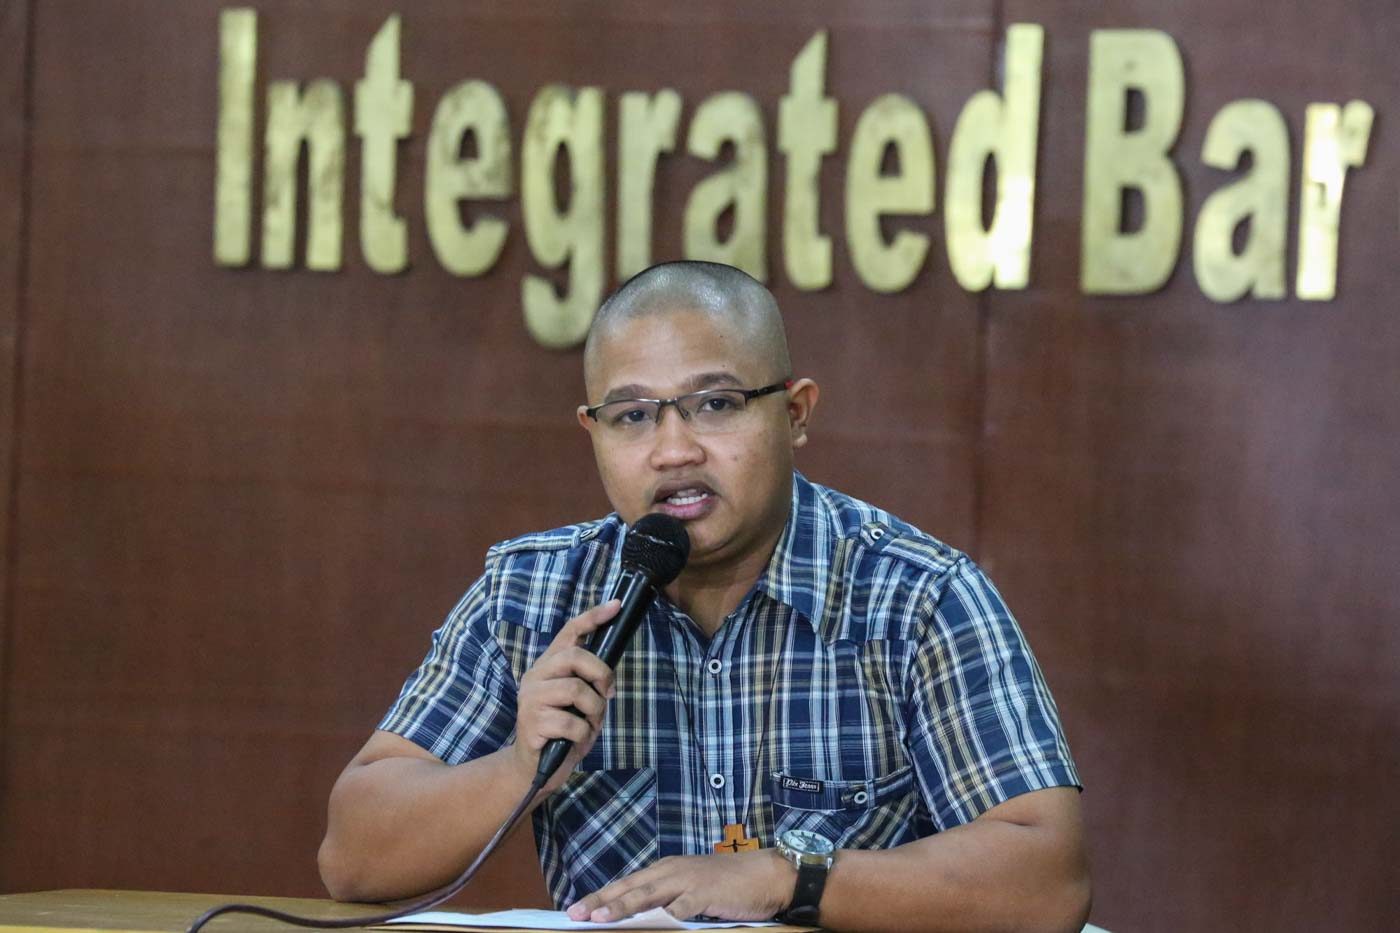 SURFACE. Peter Joemel Advincula reveals himself as Bikoy, the hooded man behind the controversial videos linking the President Duterte's family to drug links. Photo by Jire Carreon/Rappler 